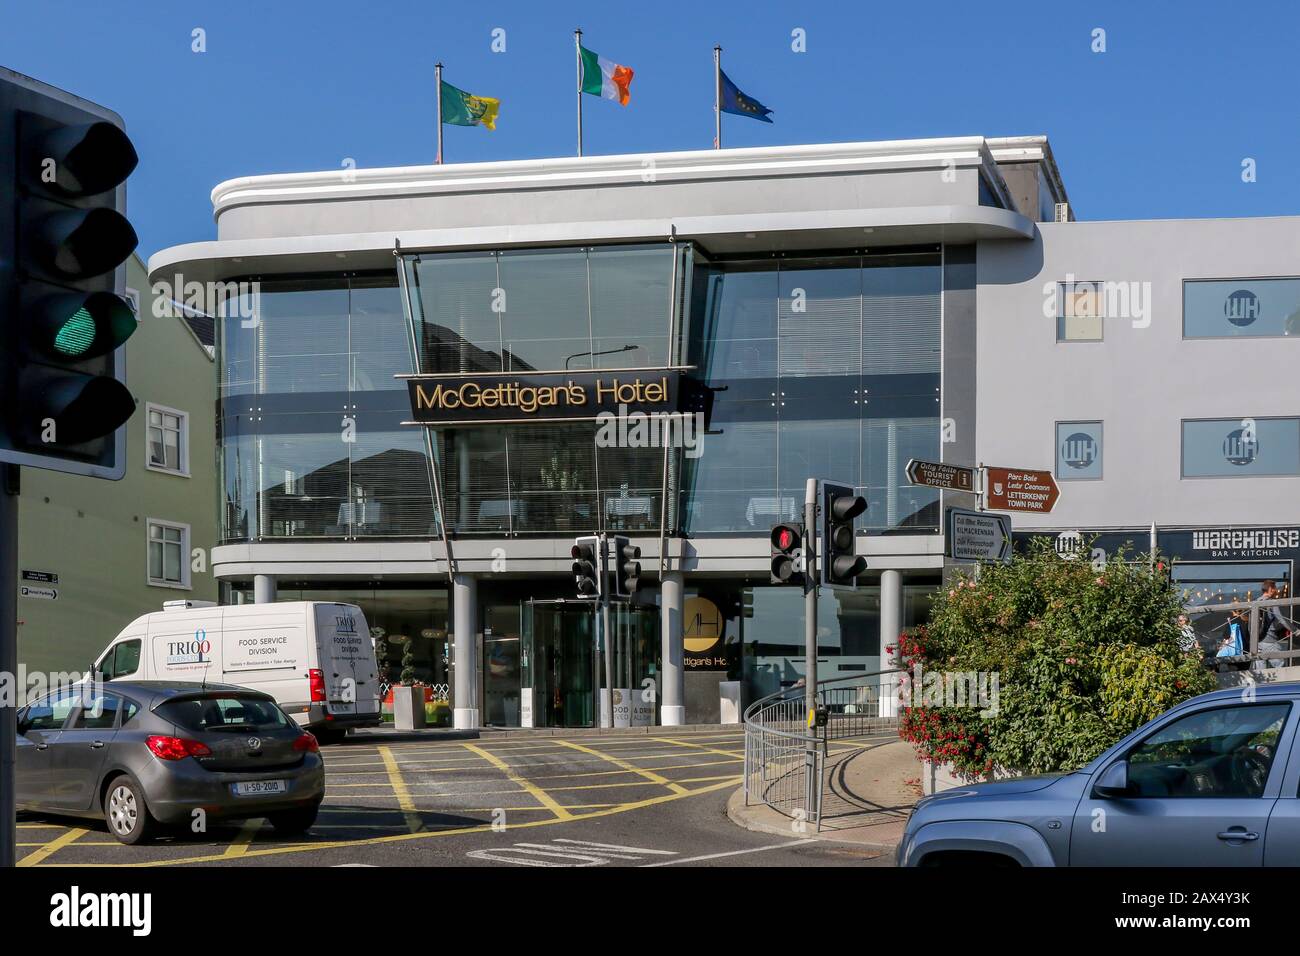 Hotel in town centre Ireland, the modern glass-front McGettigan's Hotel with traffic passing on a bright sunny autumn day in Letterkenny, Ireland. Stock Photo